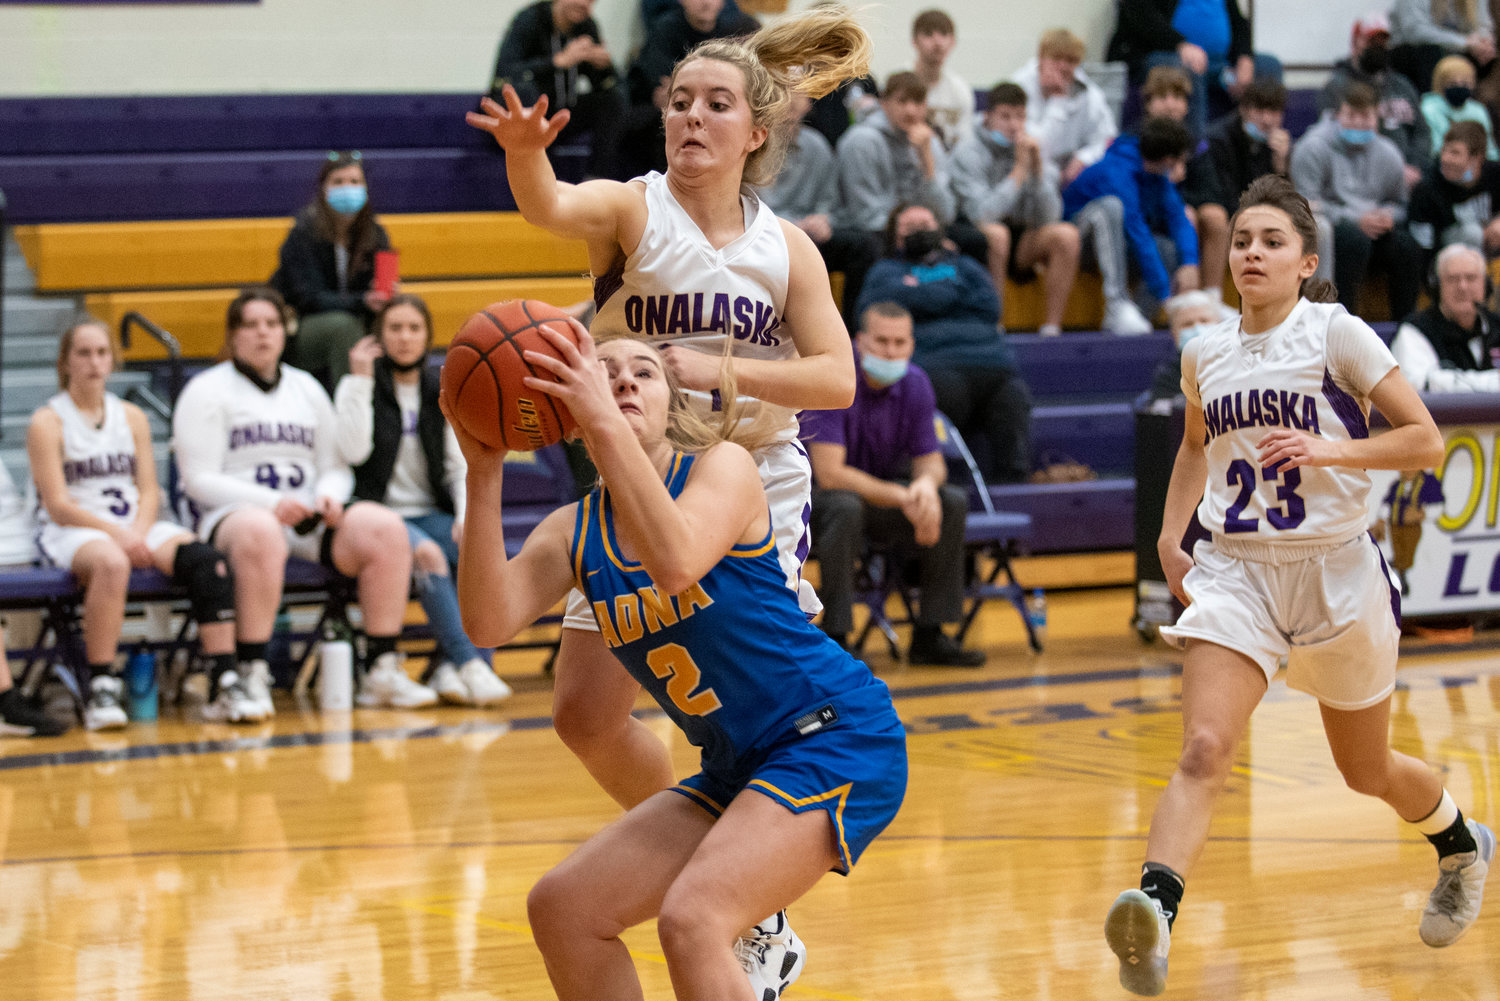 Adna's Summer White (2) looks for an open shot under the hoop as Onalaska's Callie Lawrence (21) defends on Jan. 11.